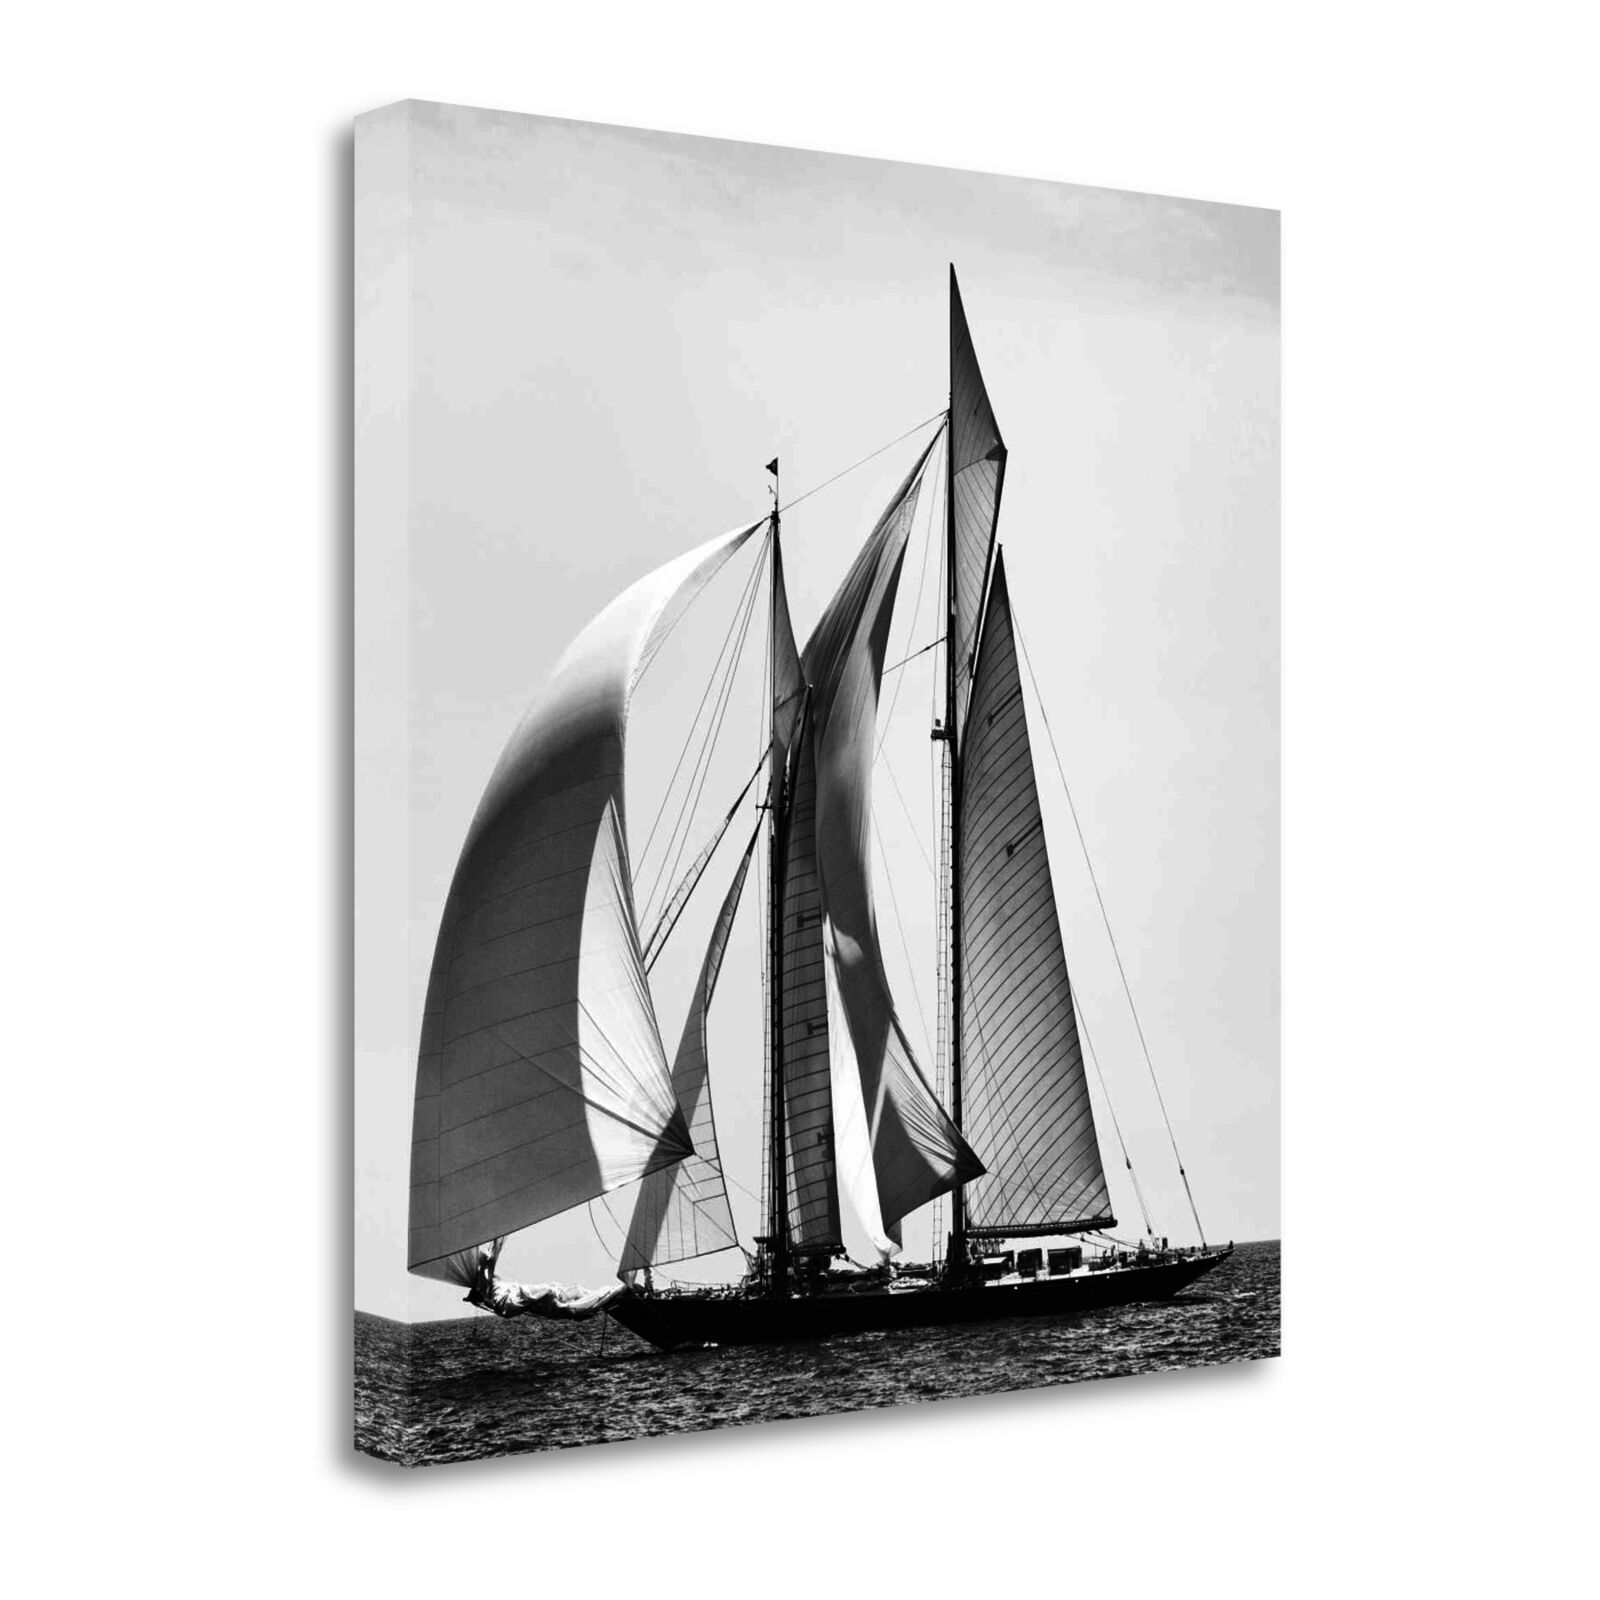 30 Black And White Sailboat Giclee Wrap Canvas Wall Art